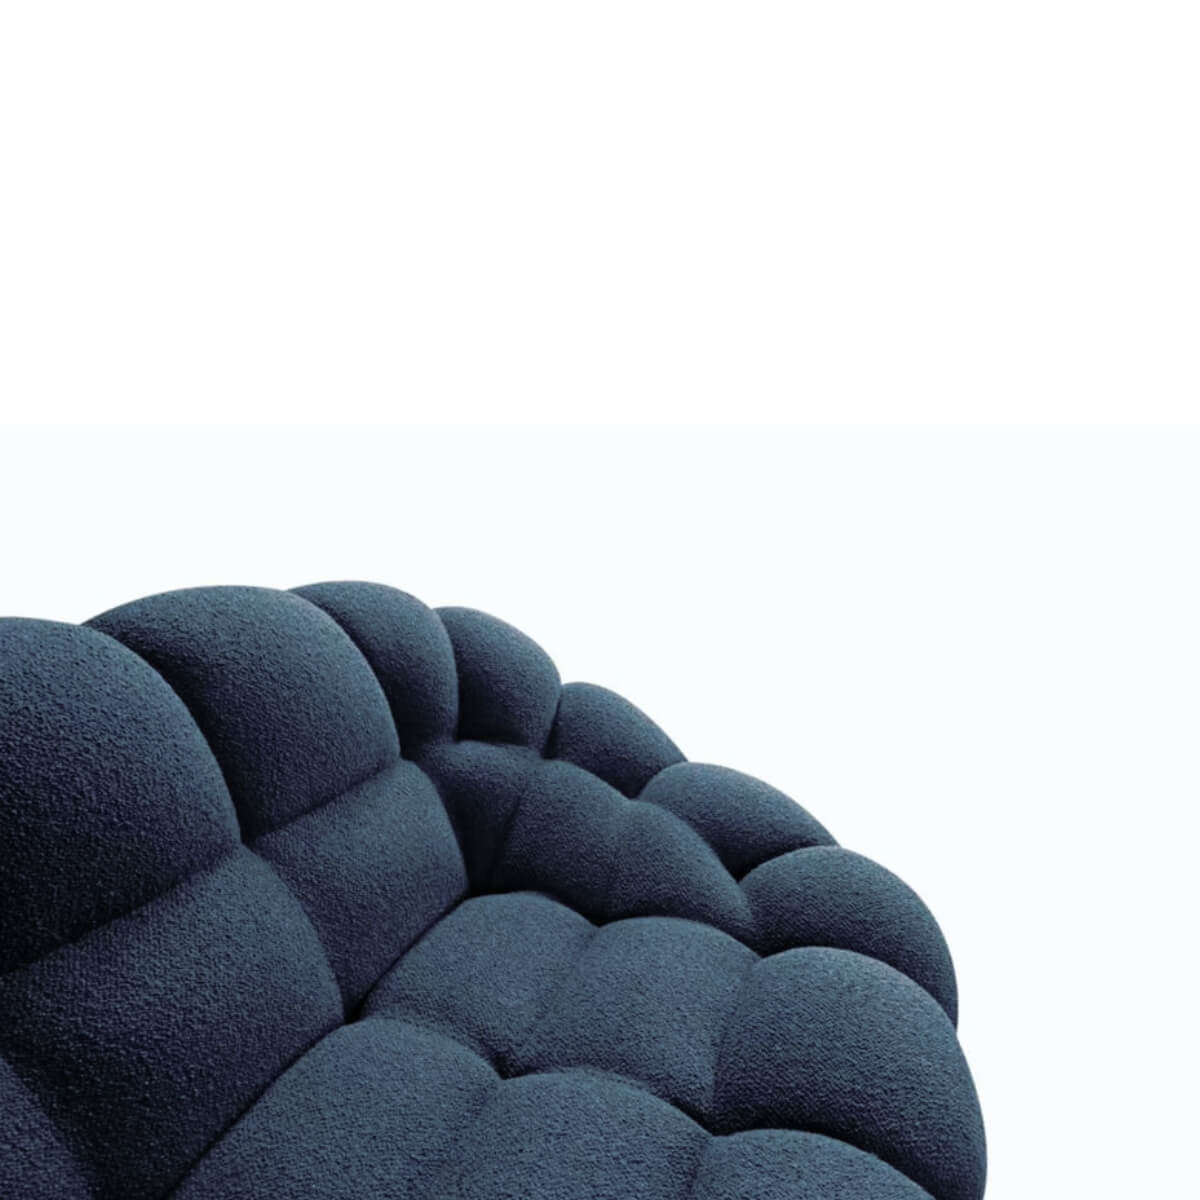 GentleGlide Teddy Fabric Sofa: A Cloud of Comfort in Your Home